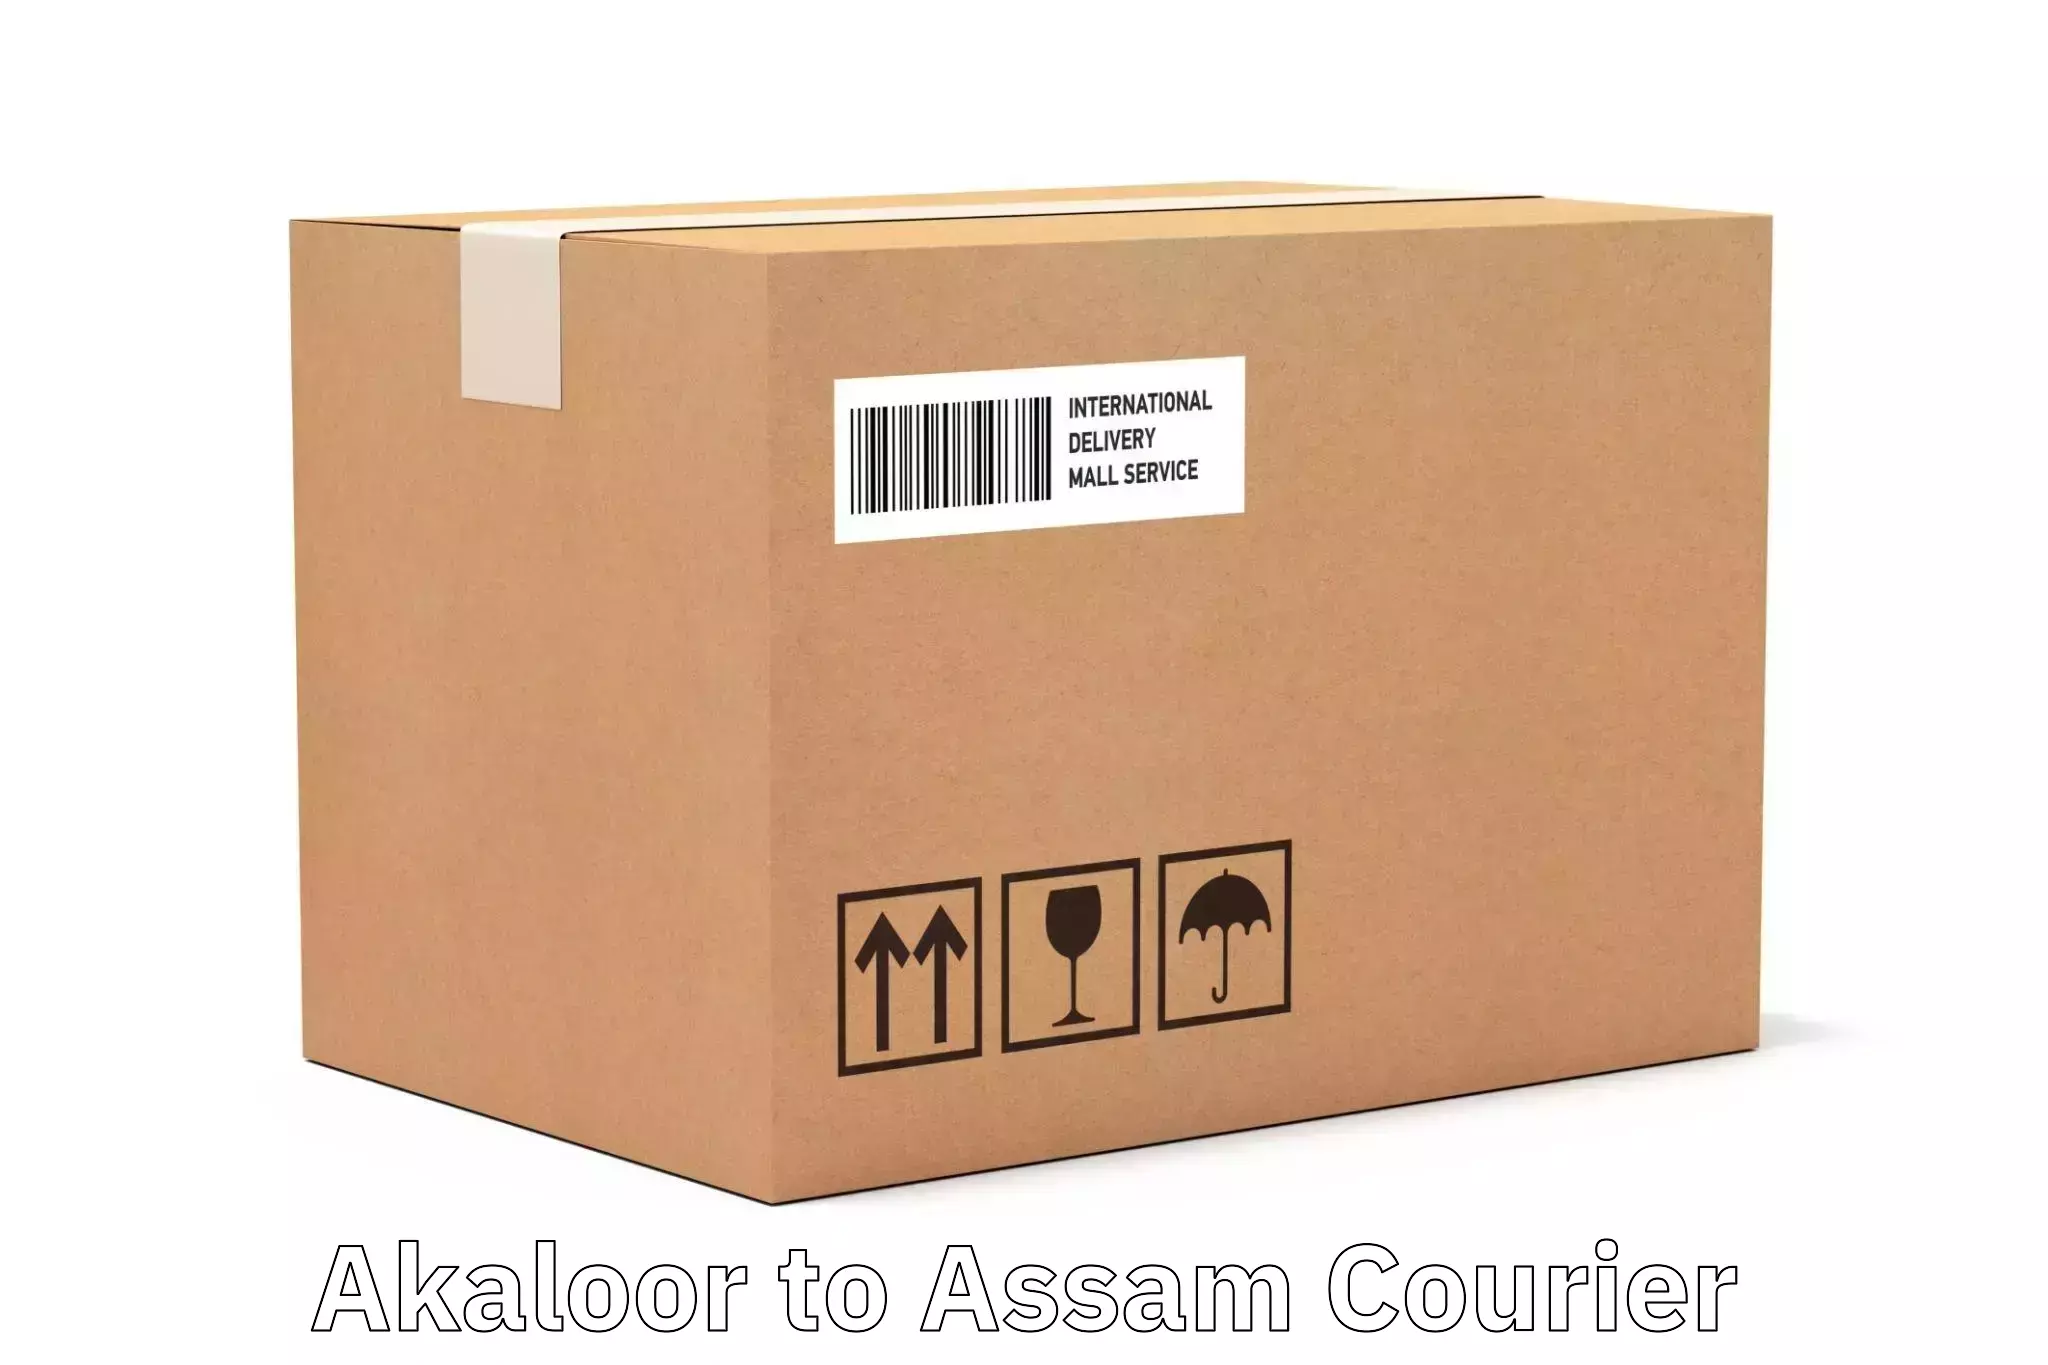 Business delivery service Akaloor to Agomani